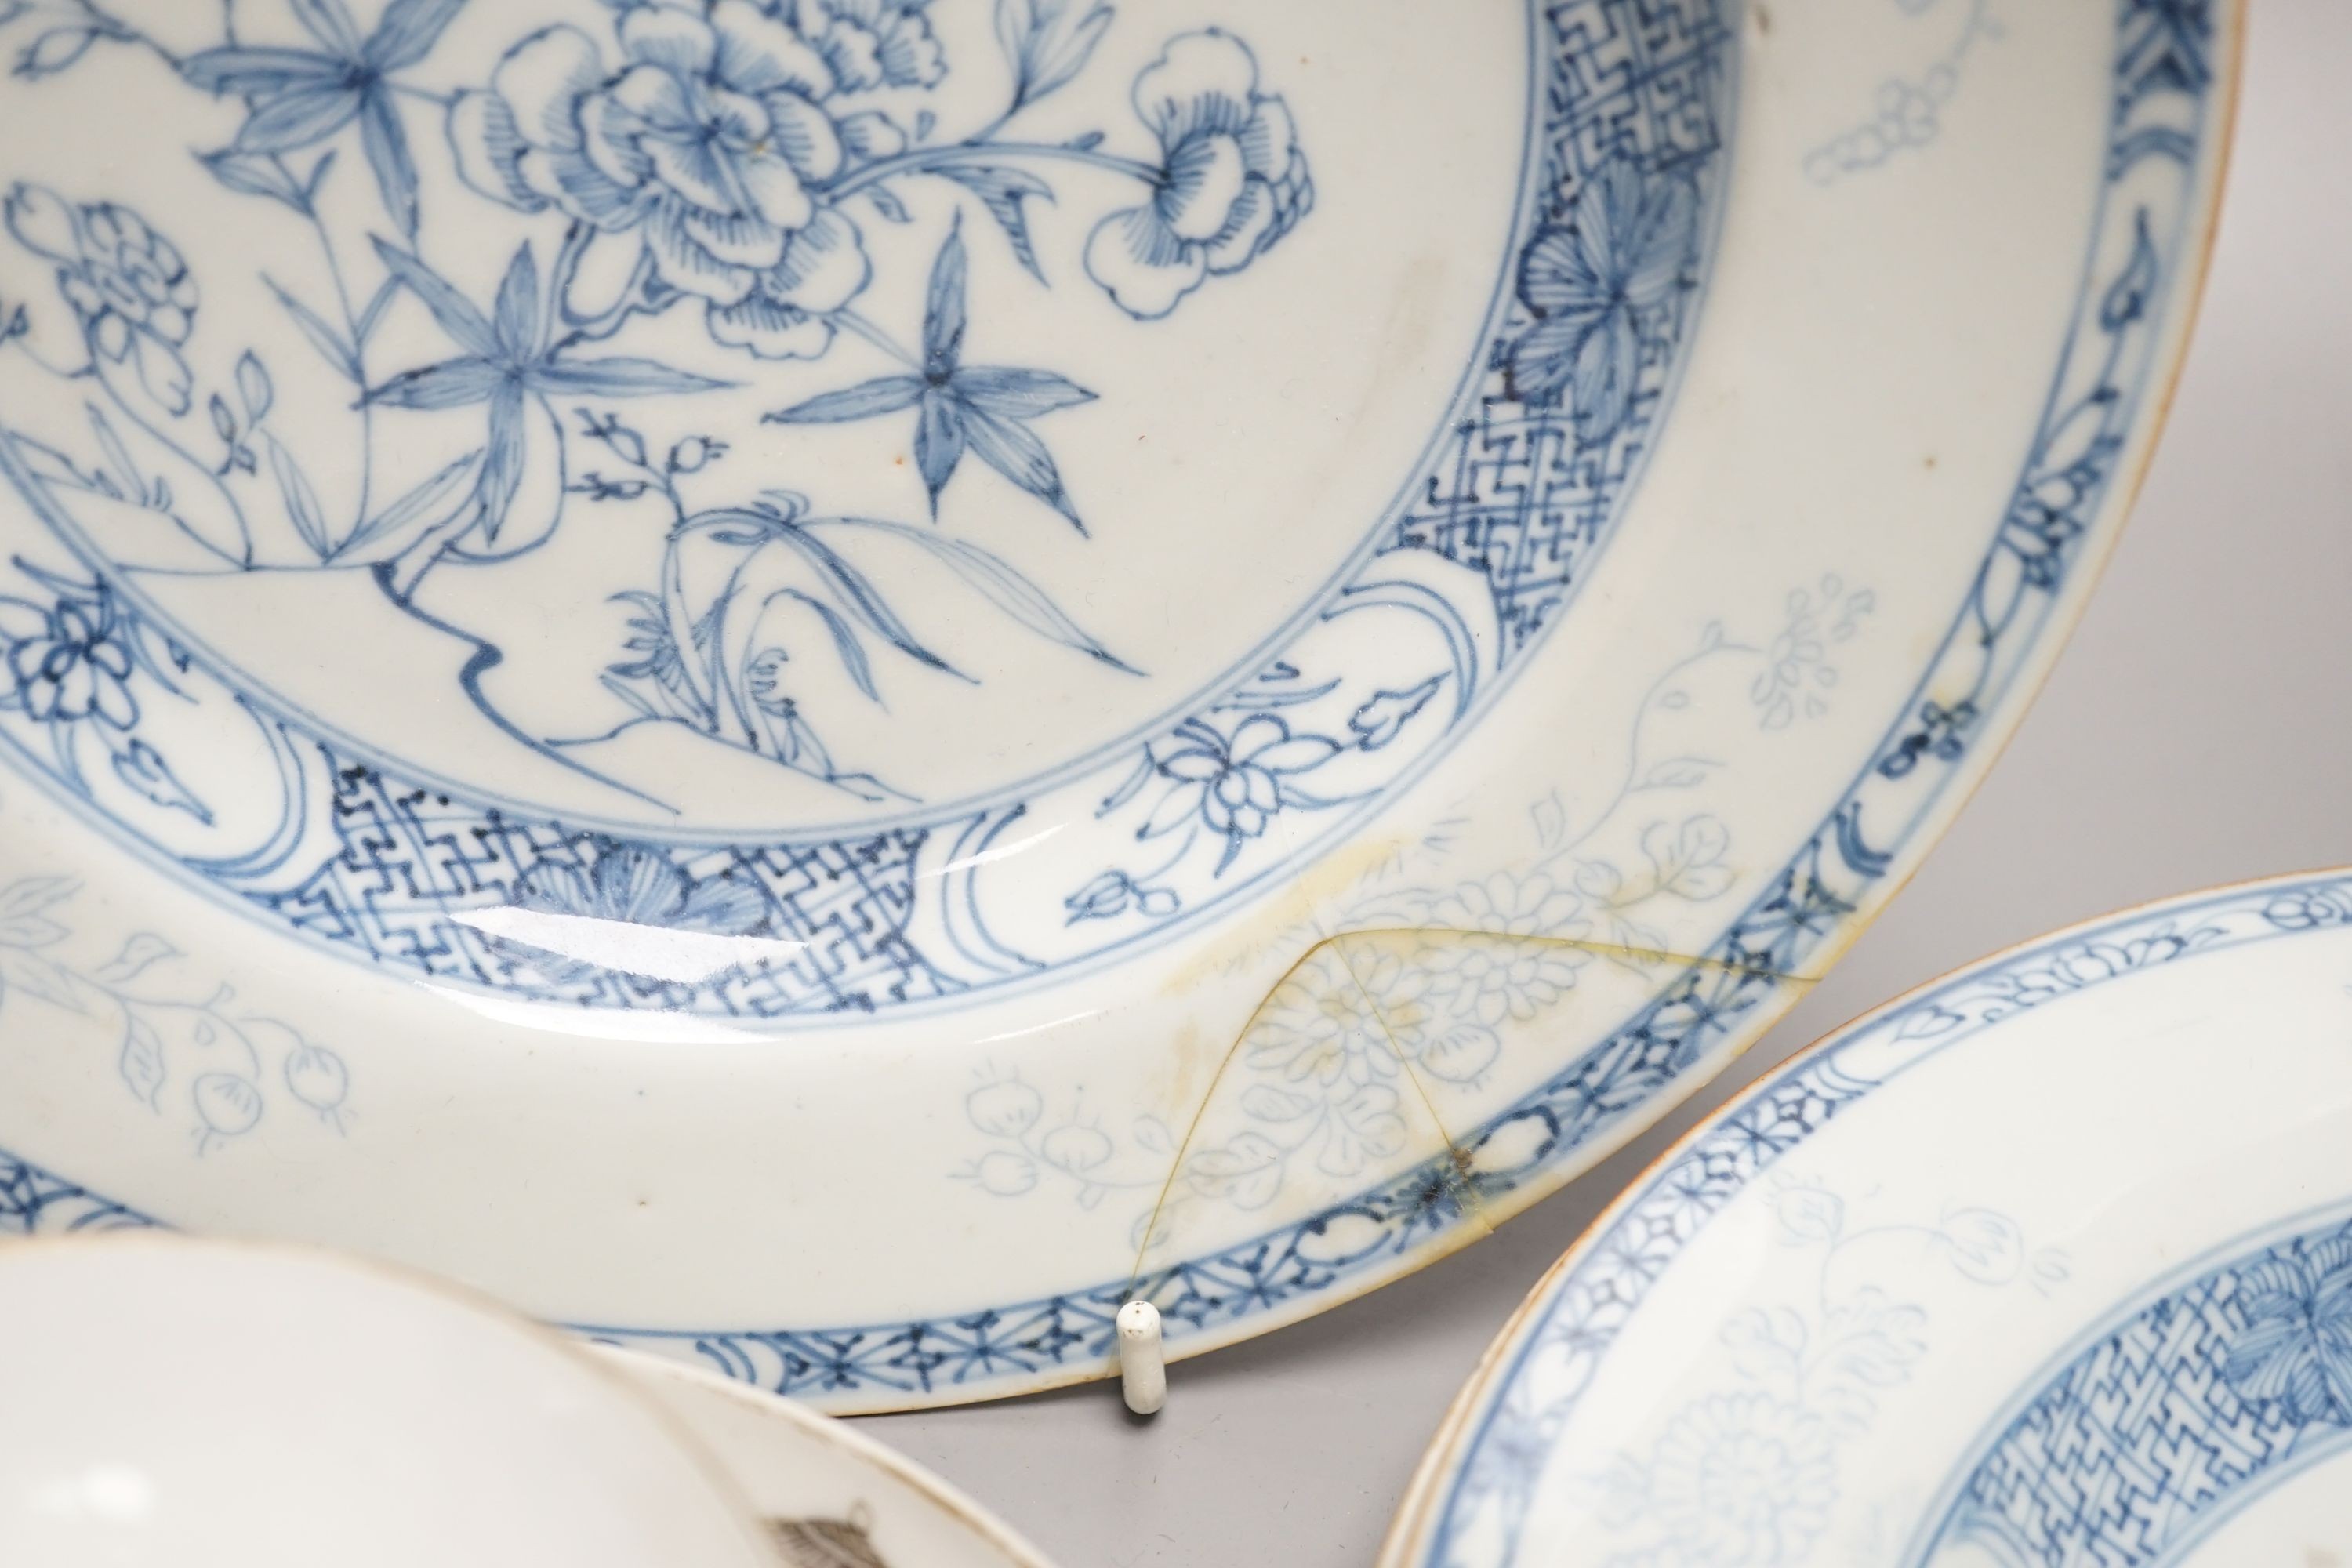 A 19th century Chinese famille rose bowl and saucer, a blue and white tea bowl on stand, a hardstone carving and three 18th century blue and white plates